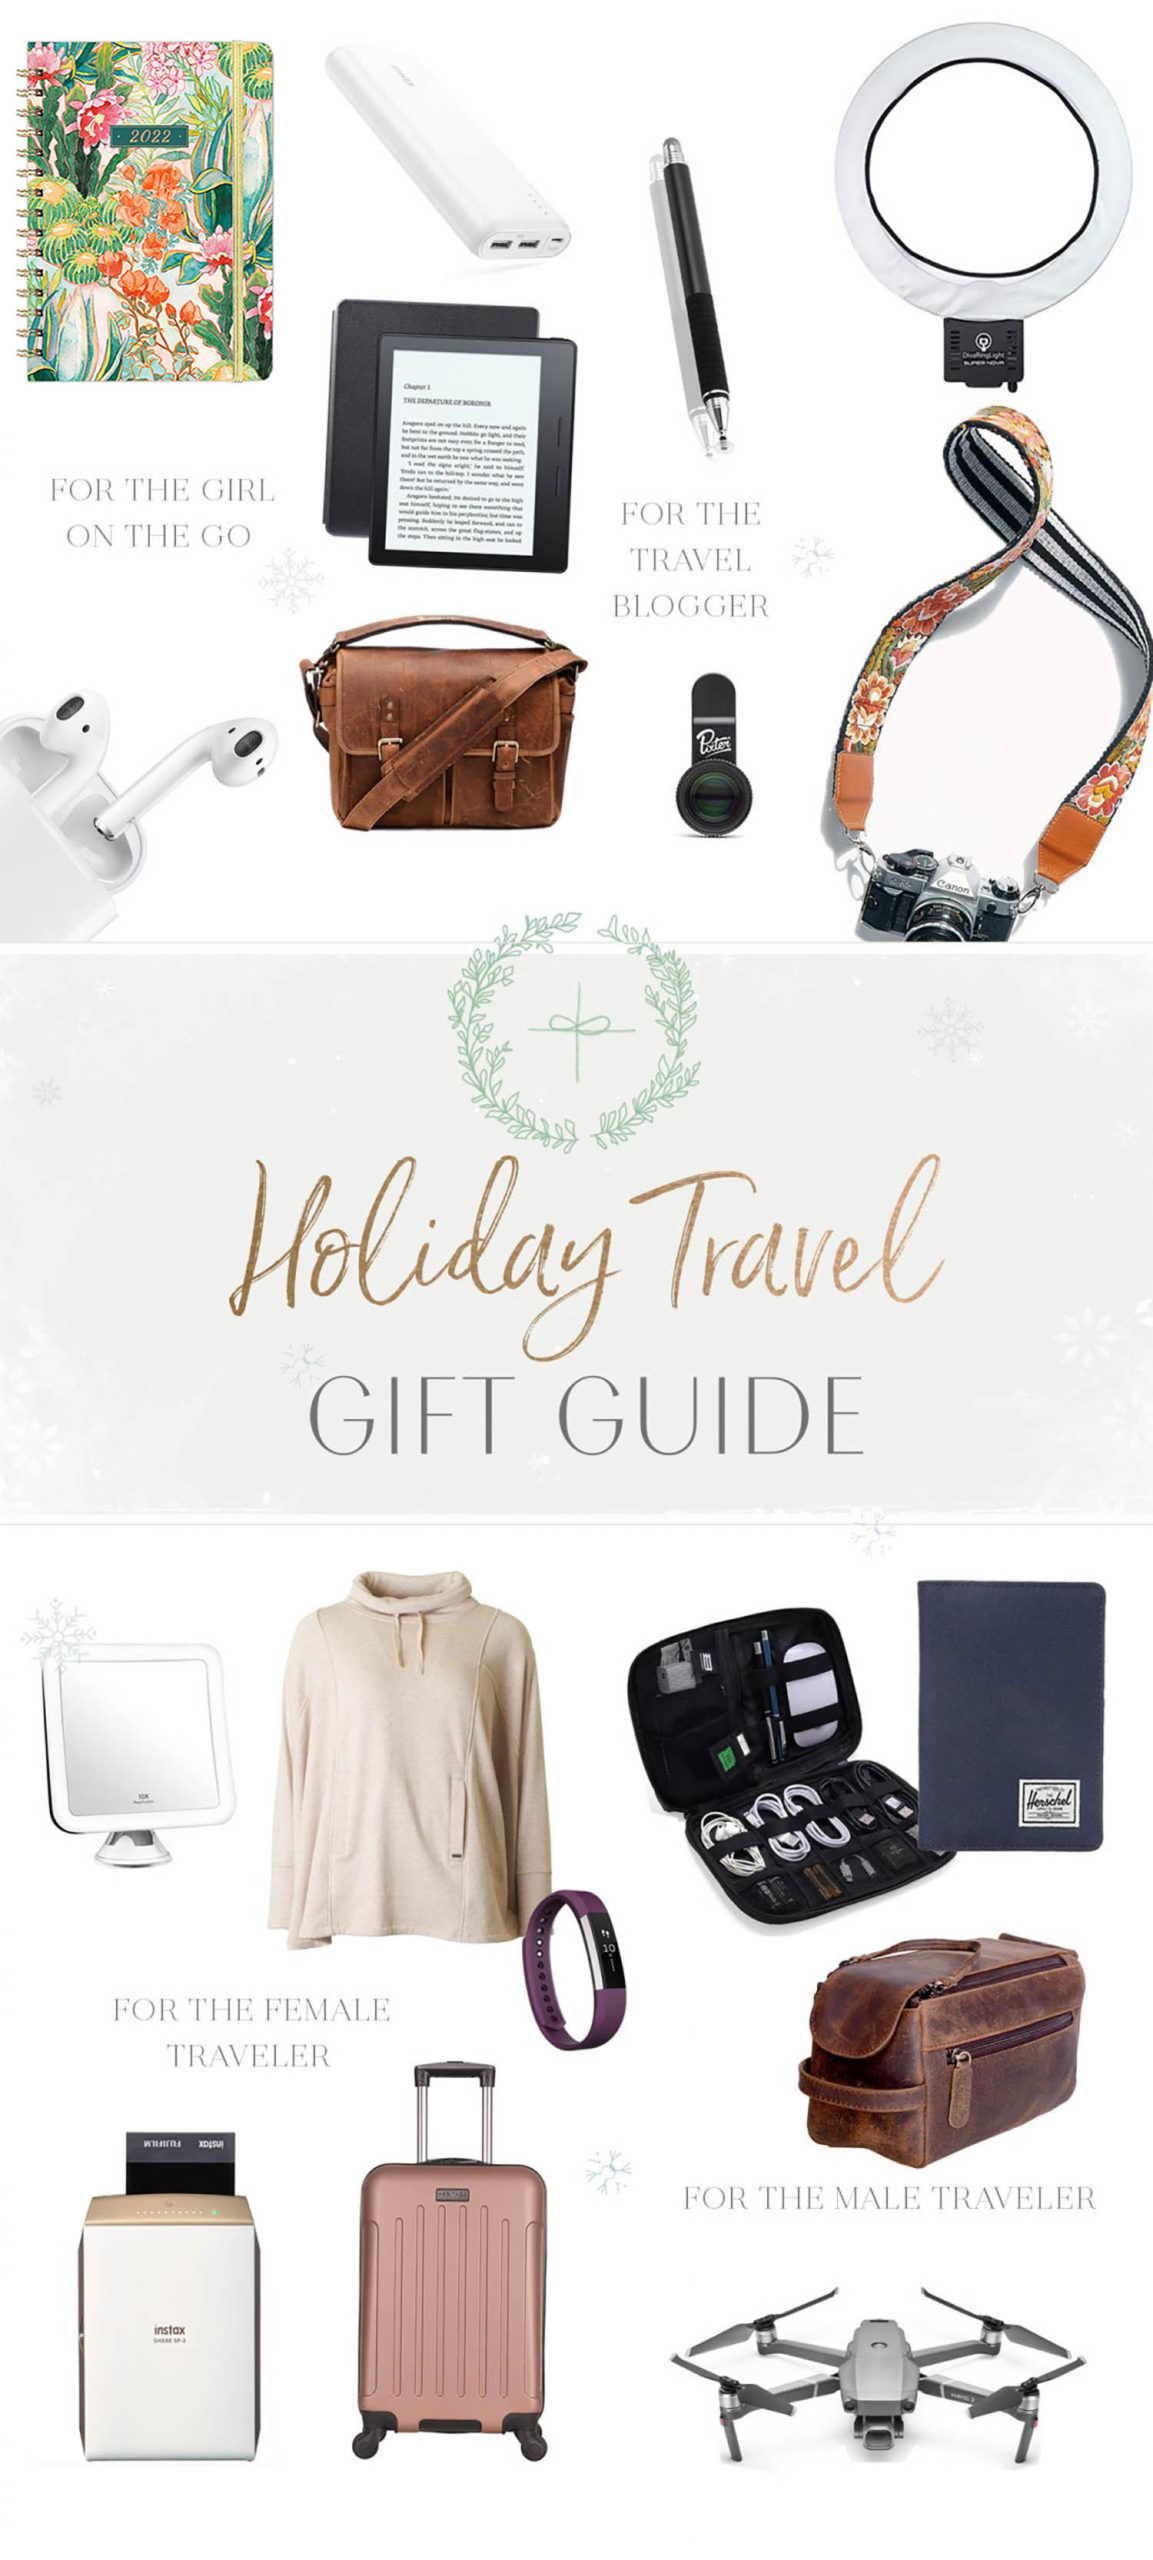 https://www.theblondeabroad.com/wp-content/uploads/2018/11/12021-Holiday-Gift-Guide-scaled.jpg